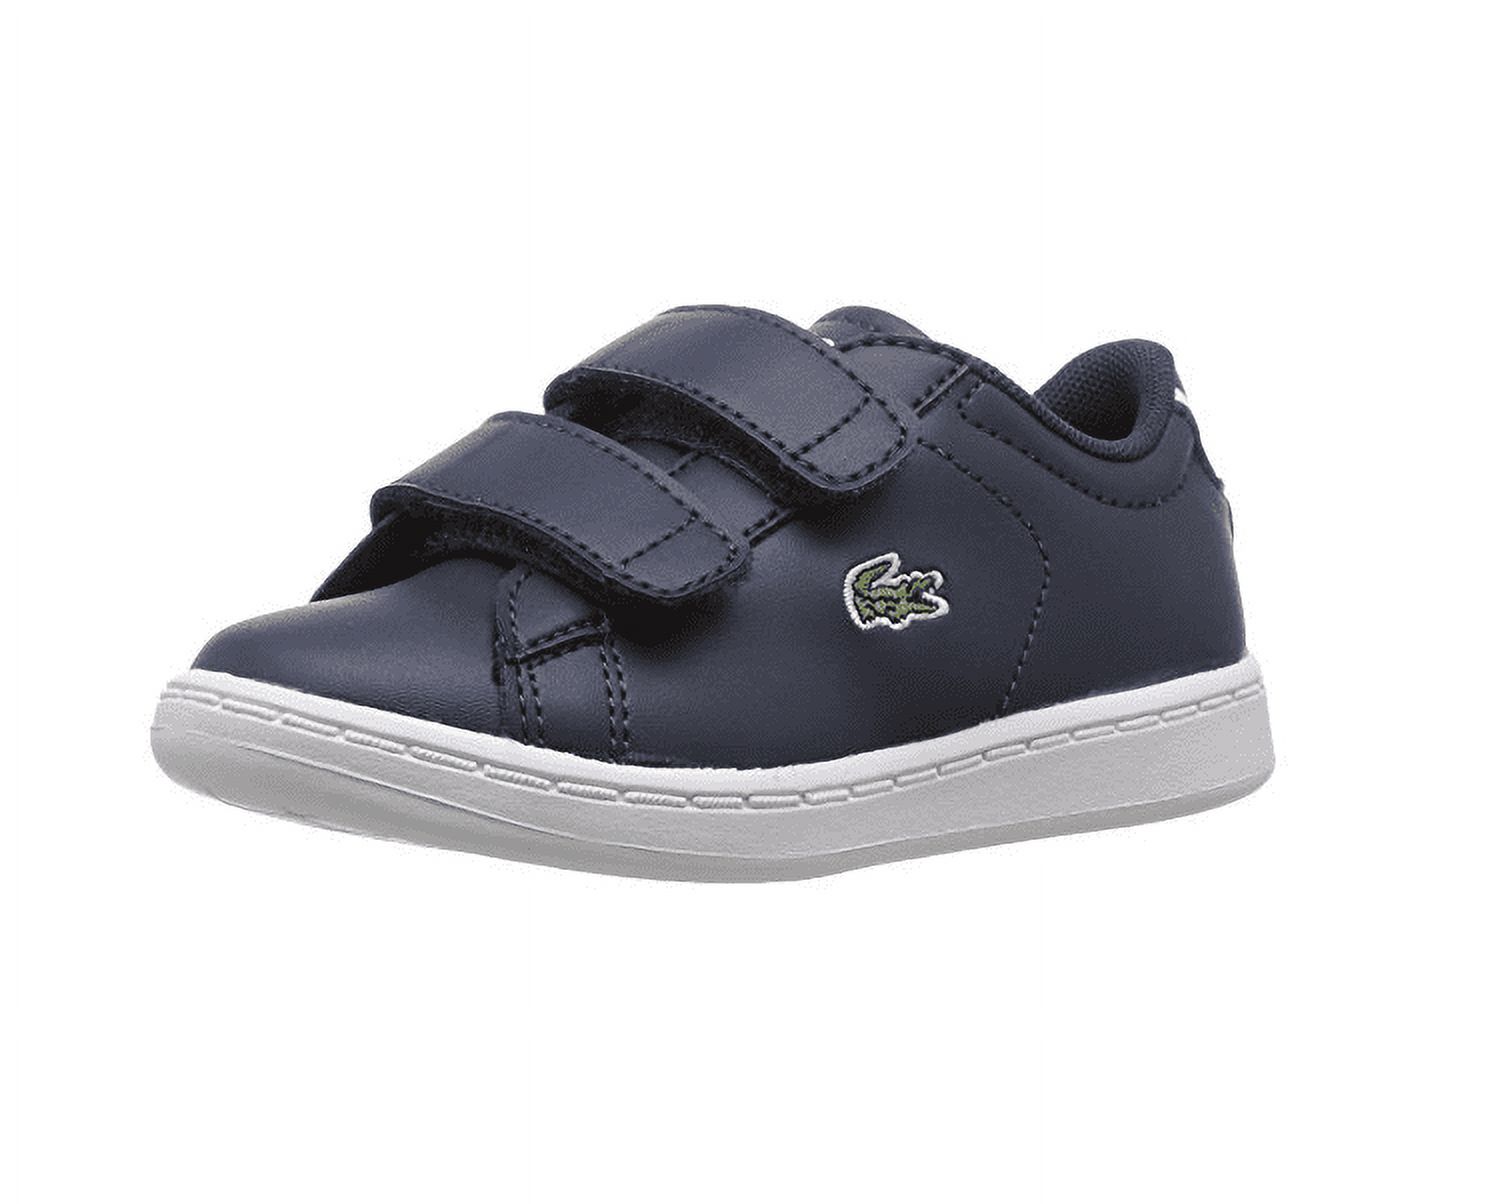 Lacoste Toddlers Carnaby Evo 317 3 Spi Casual Shoe Sneaker, 2 Color Options - image 1 of 8